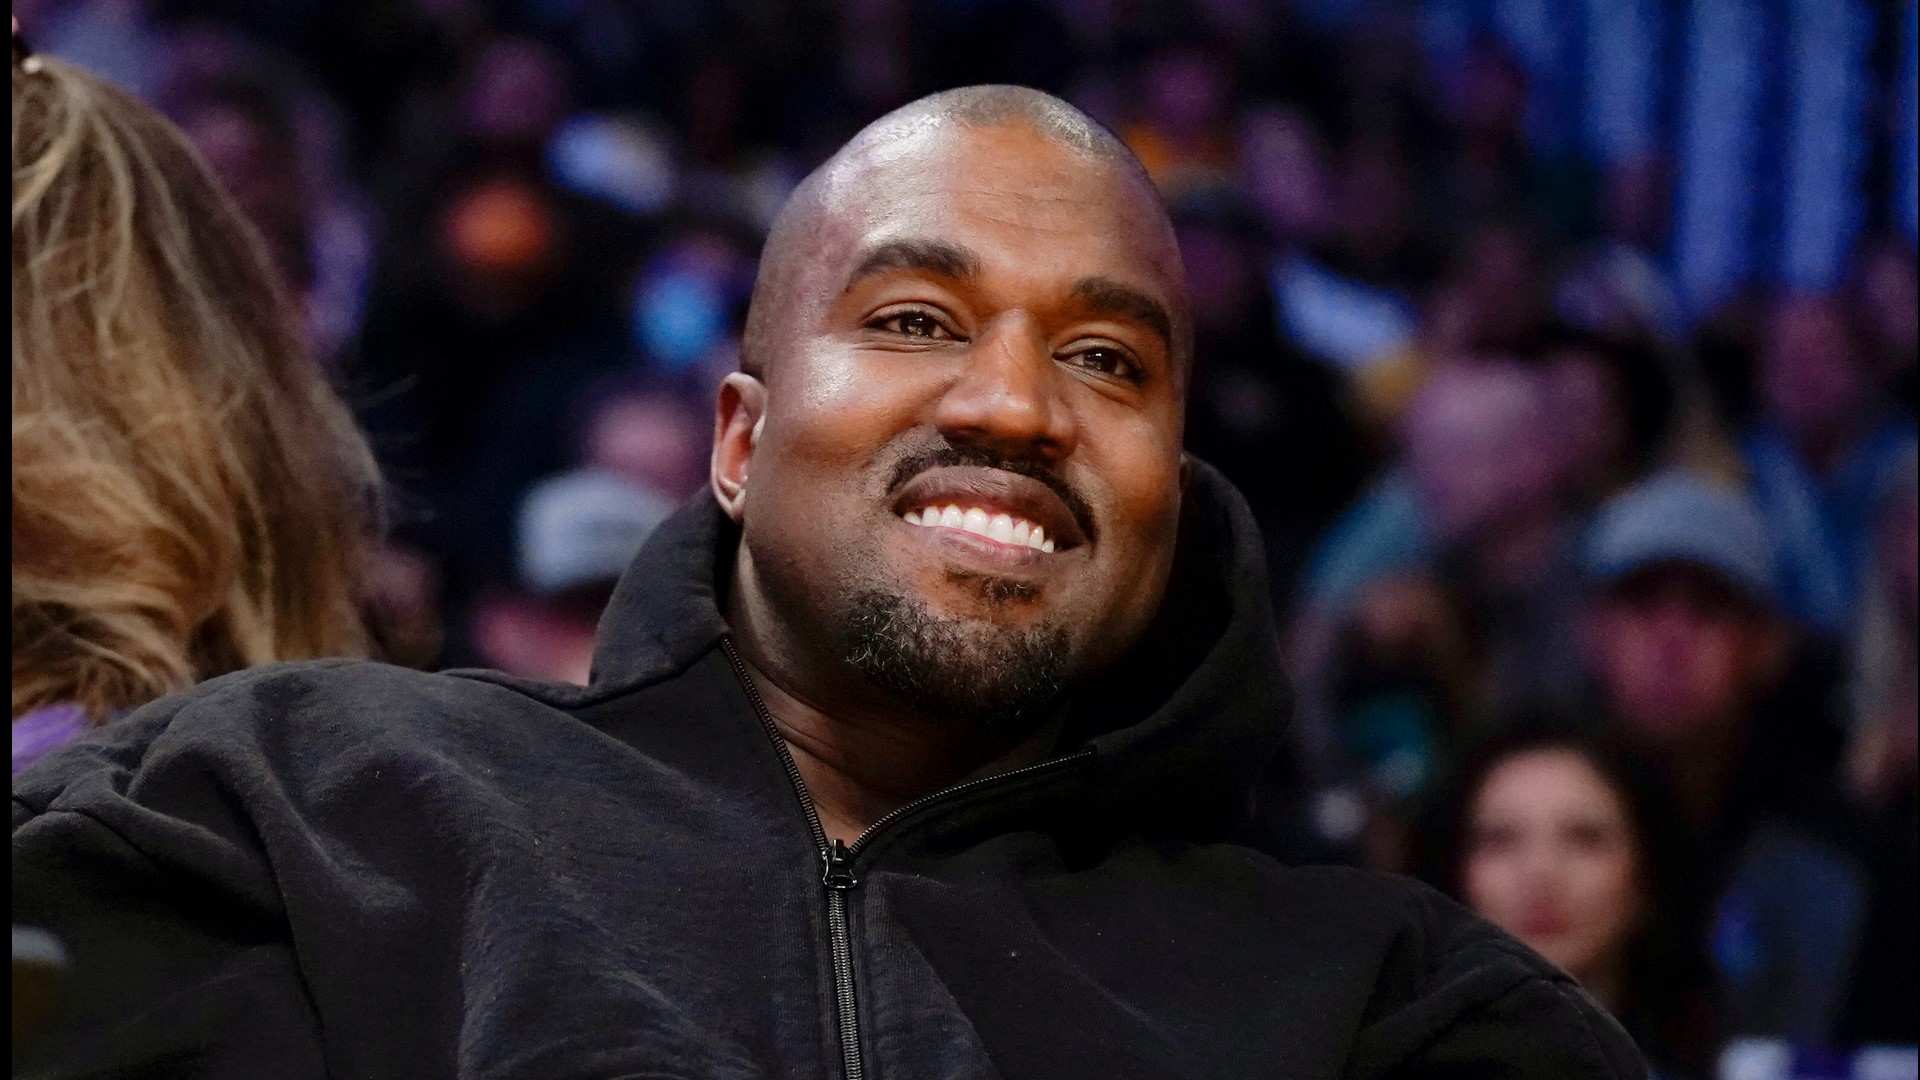 Adidas was under major pressure to end its lucrative sneaker deal with the rapper otherwise known as Kanye West. It's not the only company making that decision.